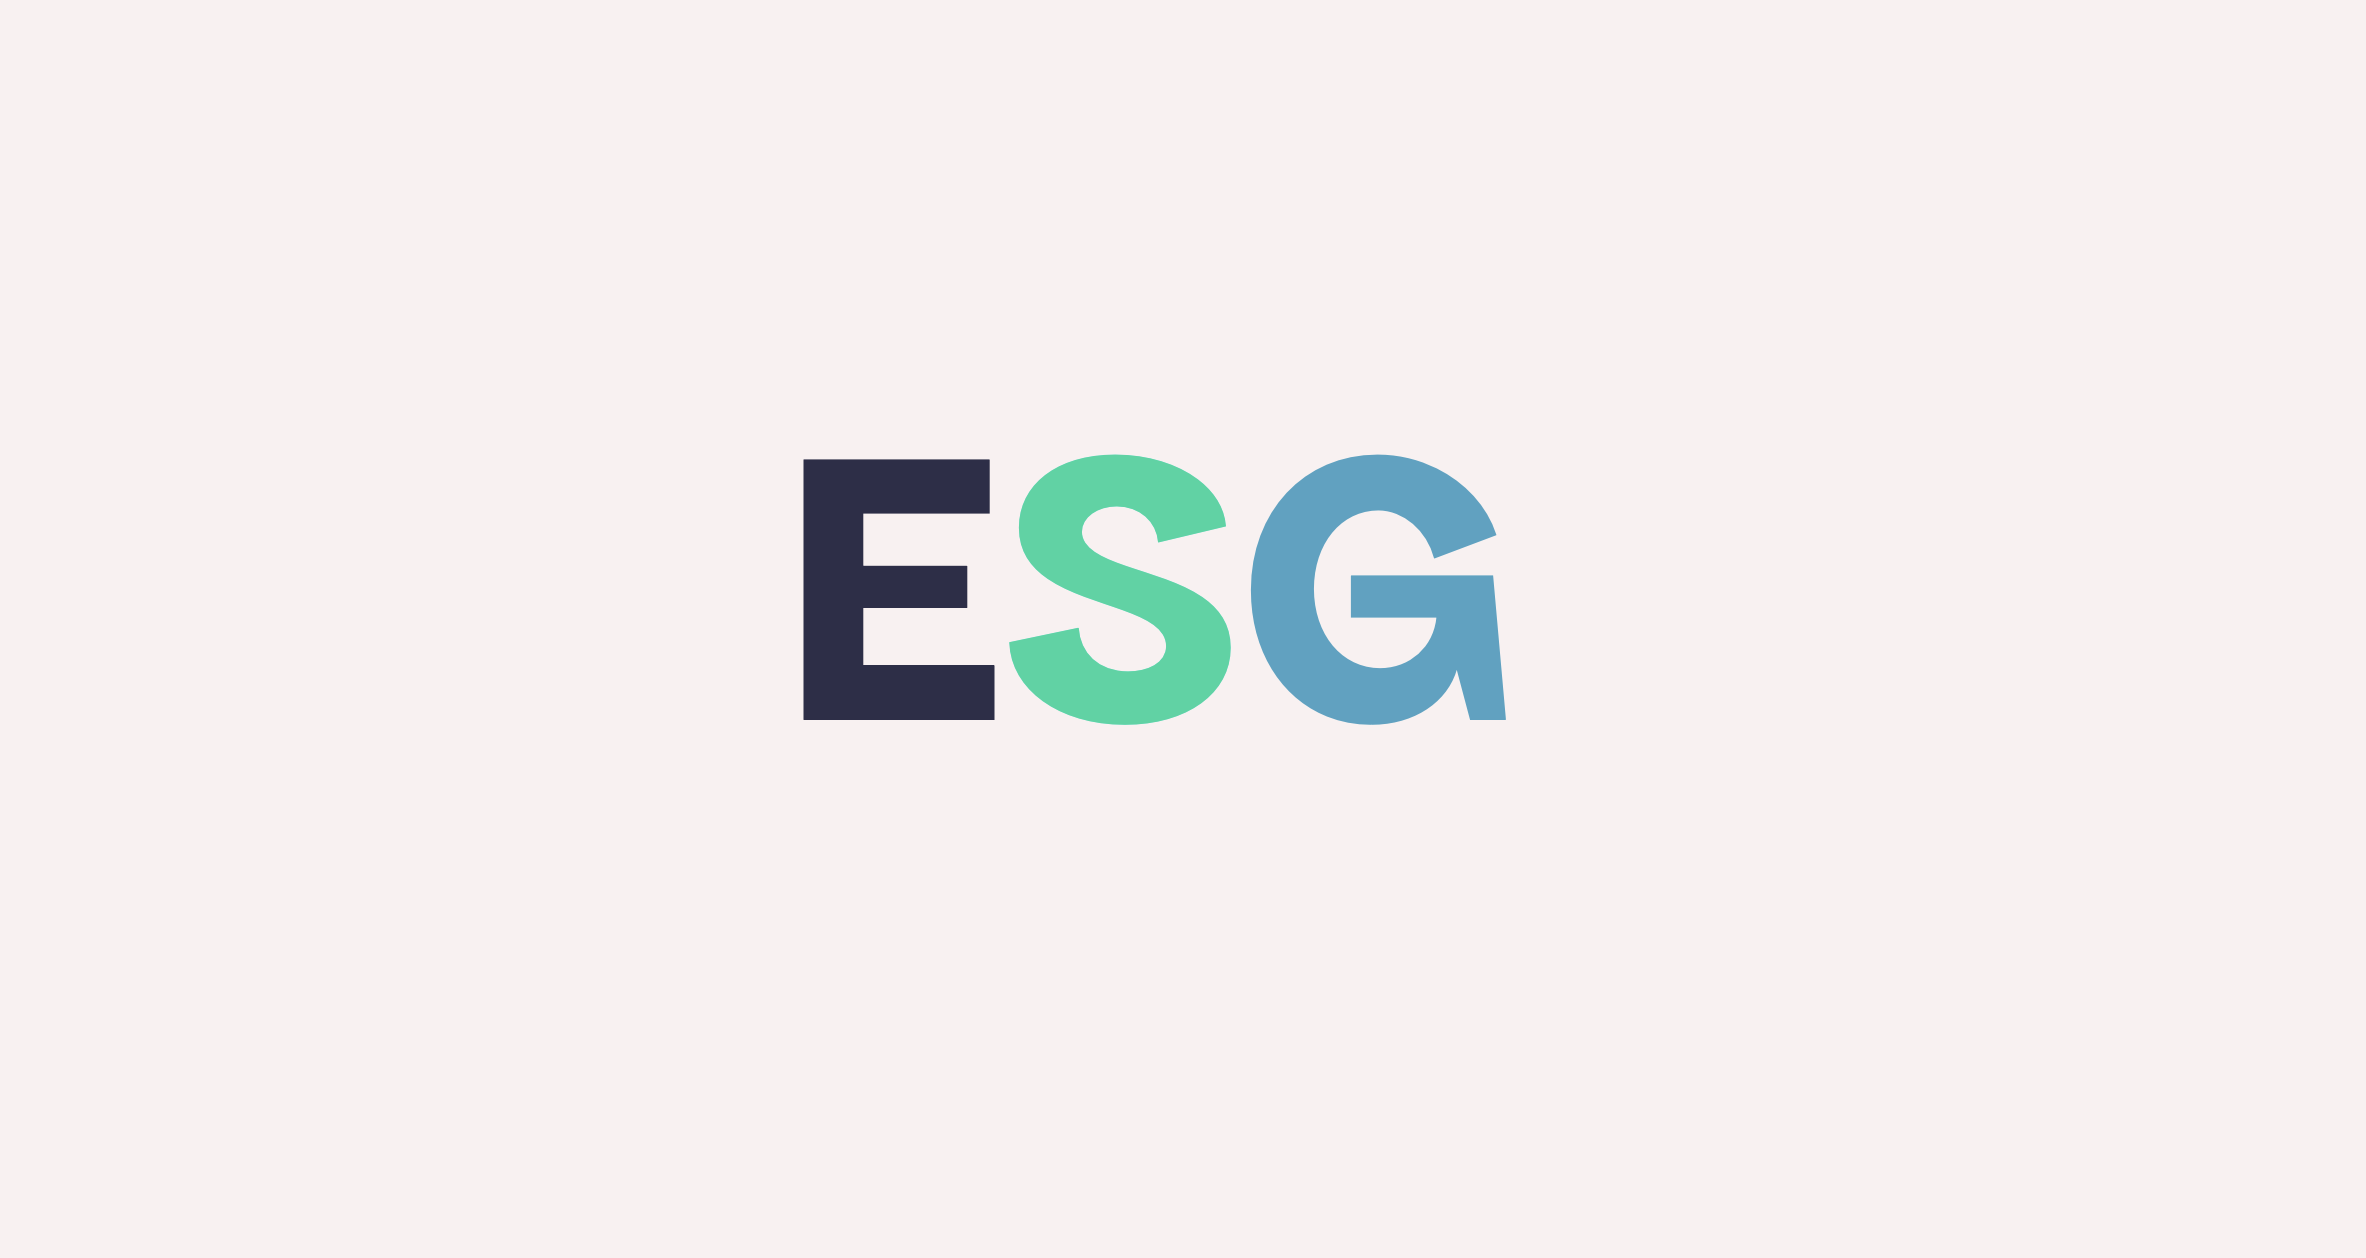 The meaning of ESG, and why we go for impact instead